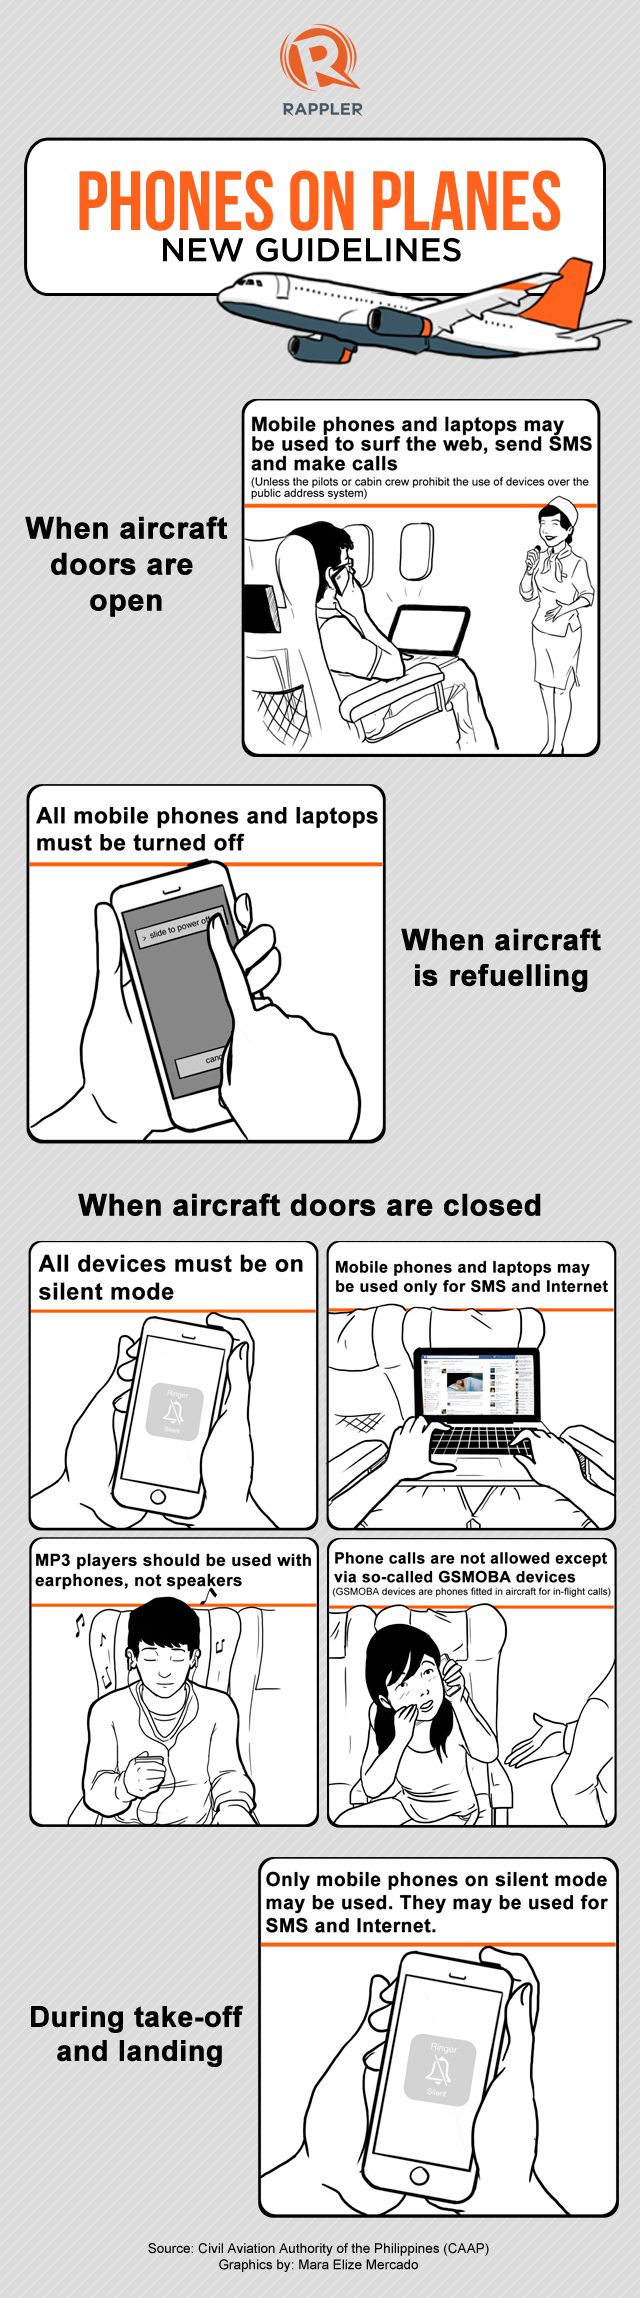 Phones on planes: New guidelines